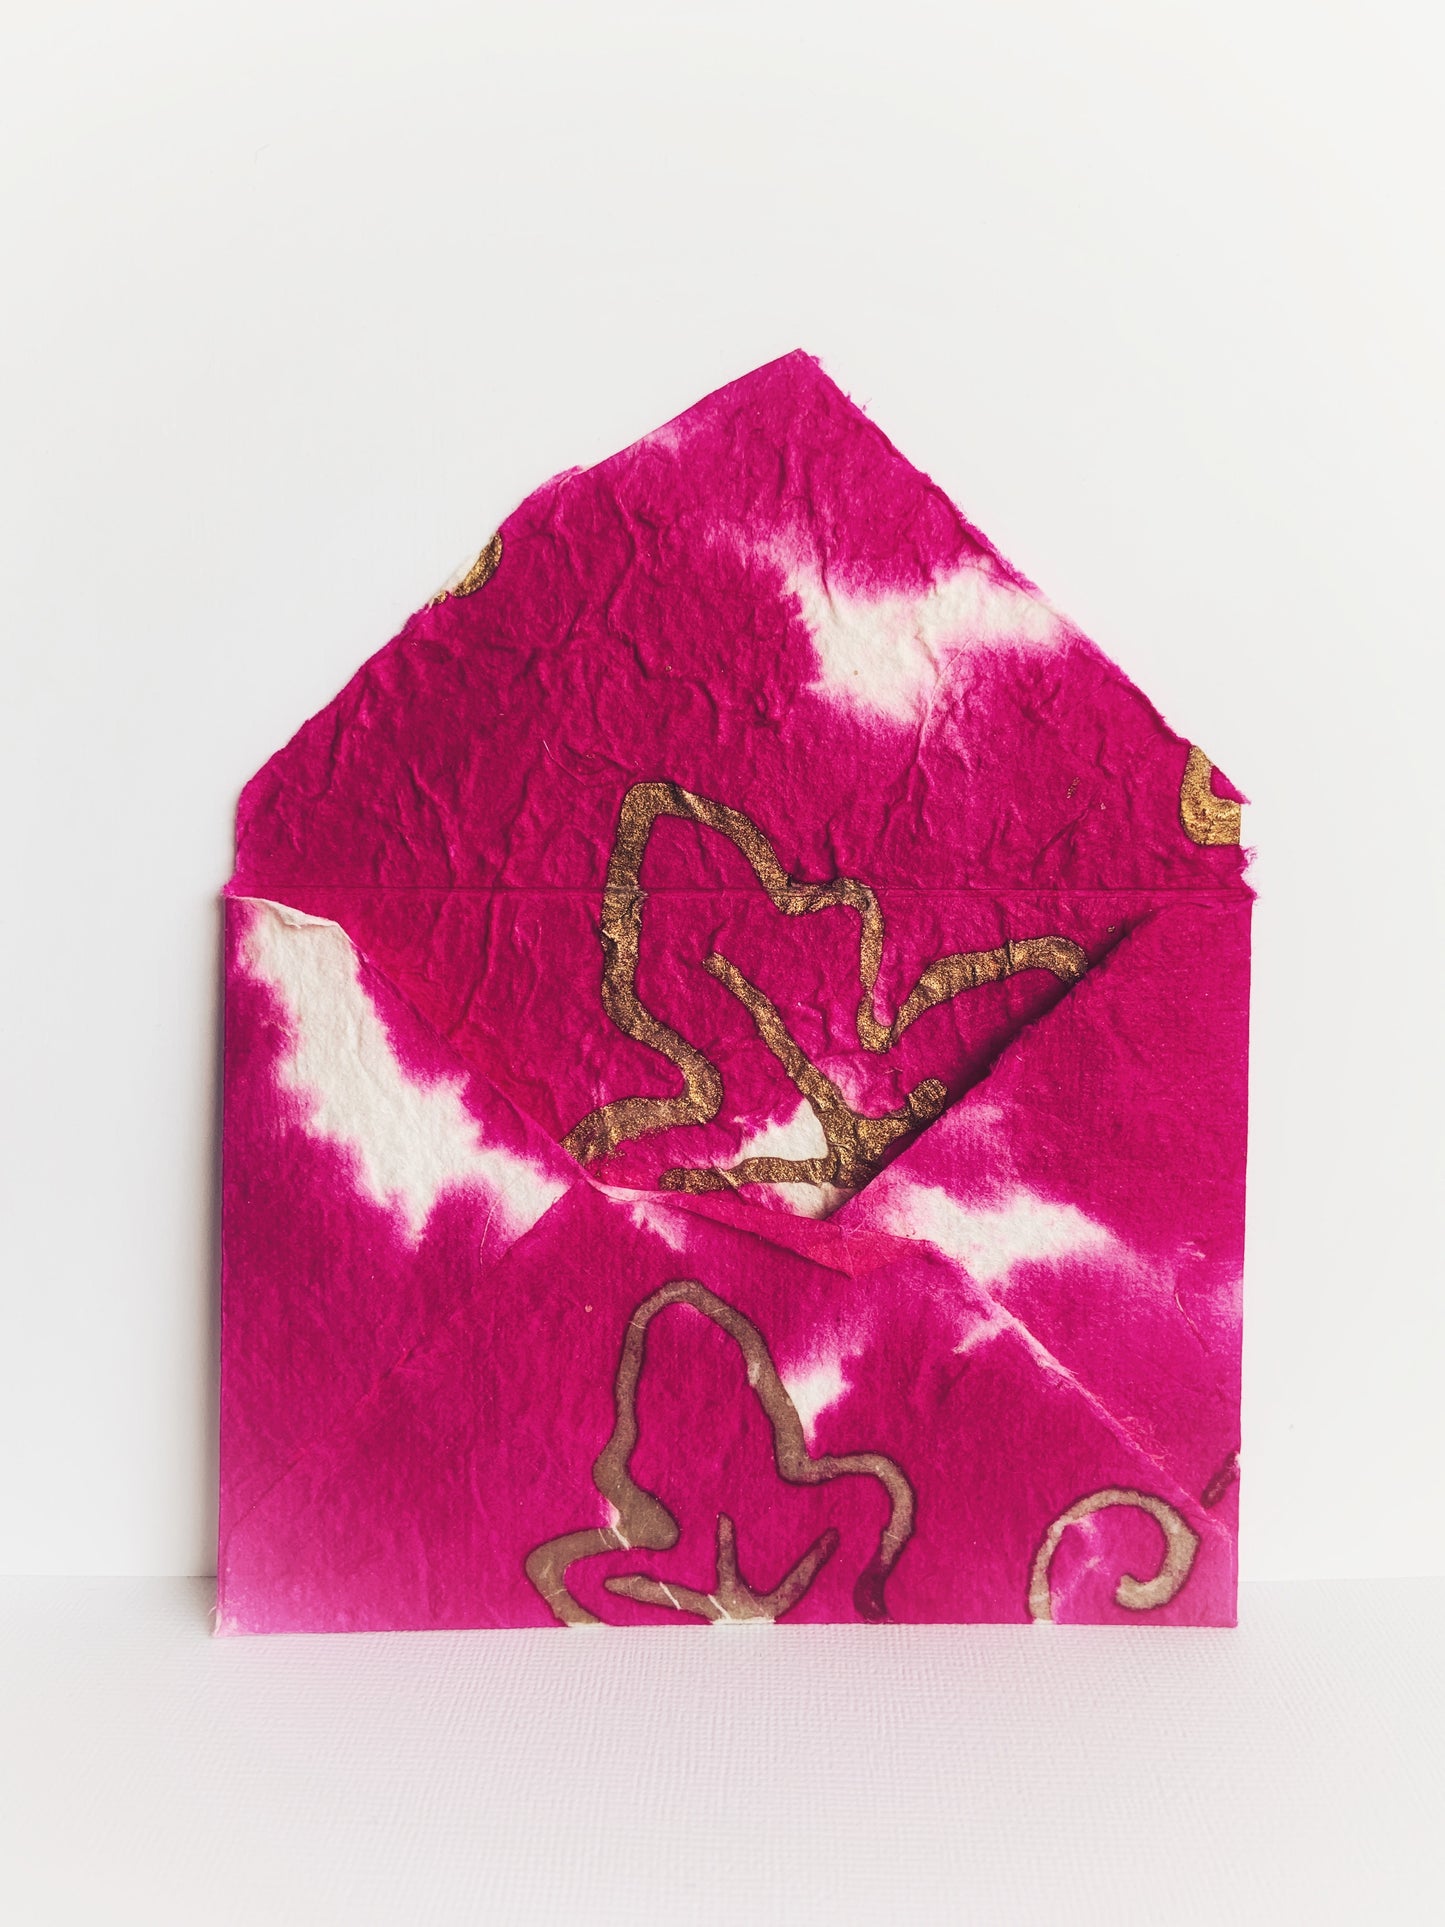 Back of handmade envelope made from pink handmade paper with gold leaf from Thailand showing detail on inside and flap.